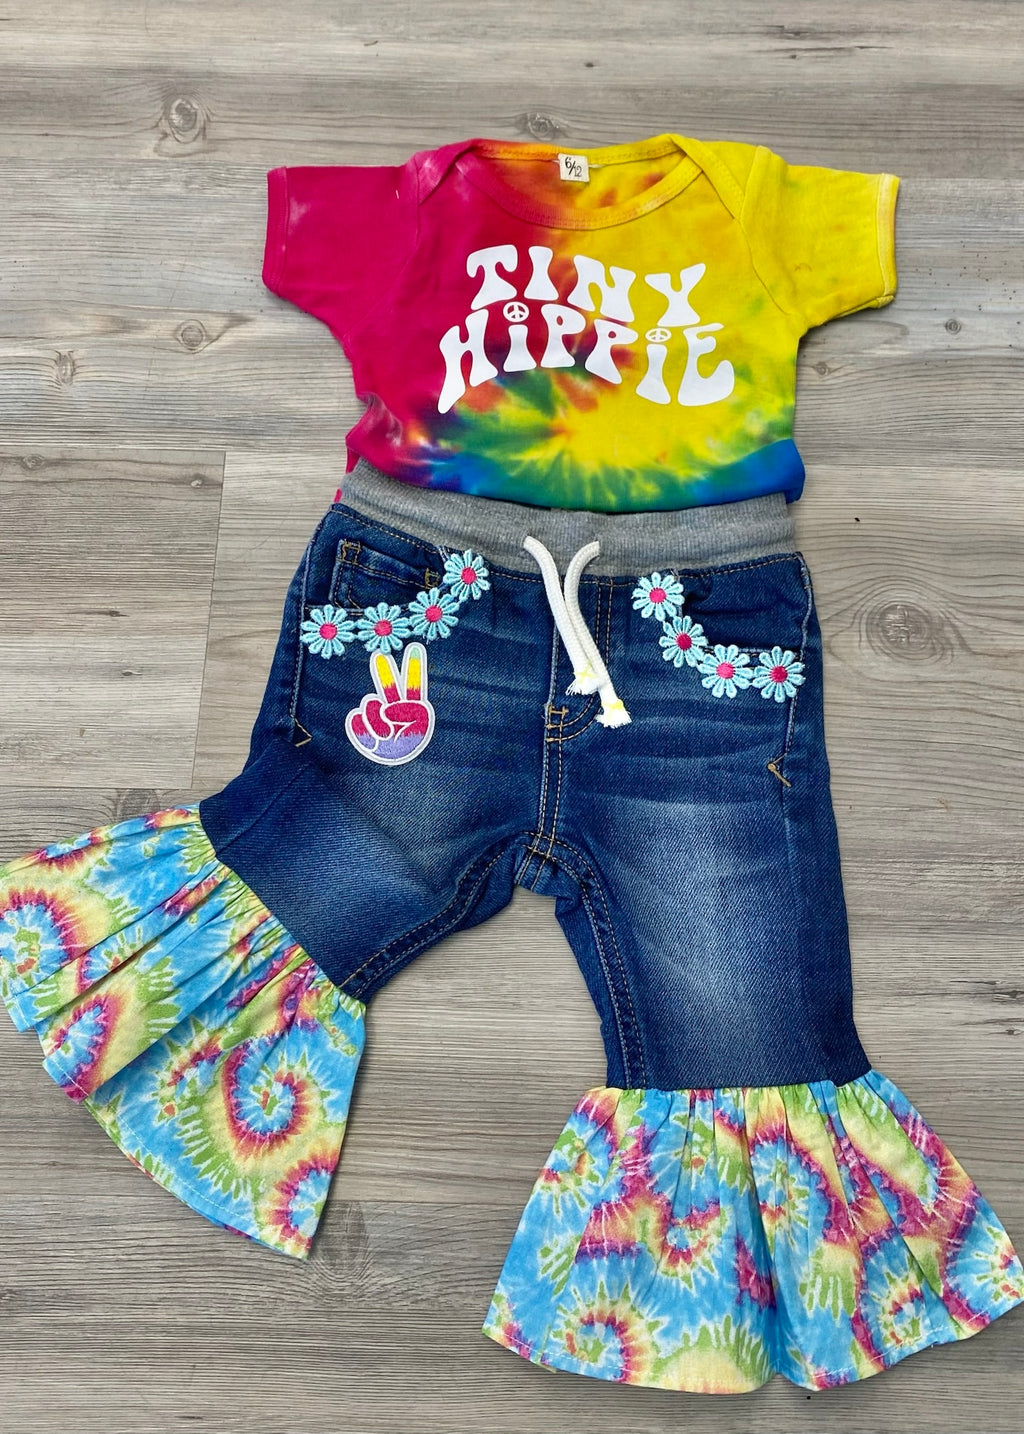 Tiny Hippie Outfit